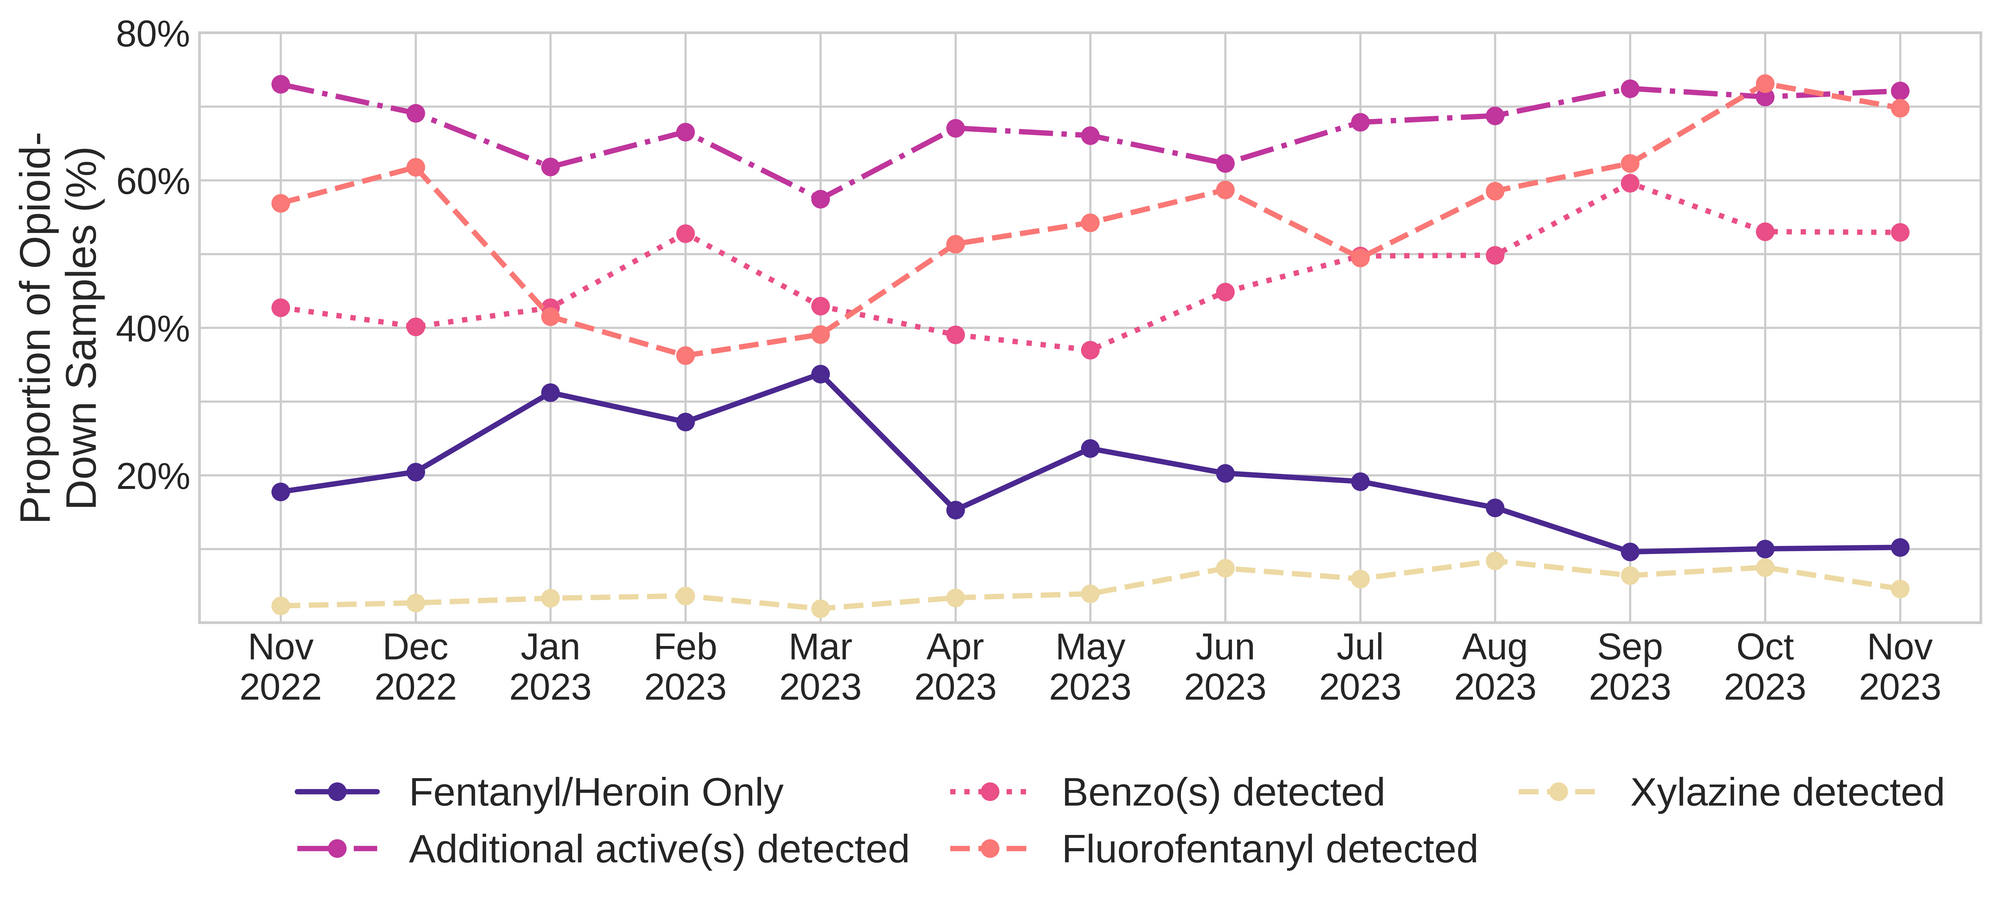 Figure 3. The percentage of expected opioid-down samples checked between November 2022 and November 2023 that only contained fentanyl/heroin actives (solid dark blue), opioid-down samples with an additional active detected (dot-dashed purple), opioid-down samples that contained a benzodiazepine-related drug (dotted magenta), opioid-down samples that contained fluorofentanyl (dashed salmon), and opioid-down samples that contained xylazine (dashed yellow).